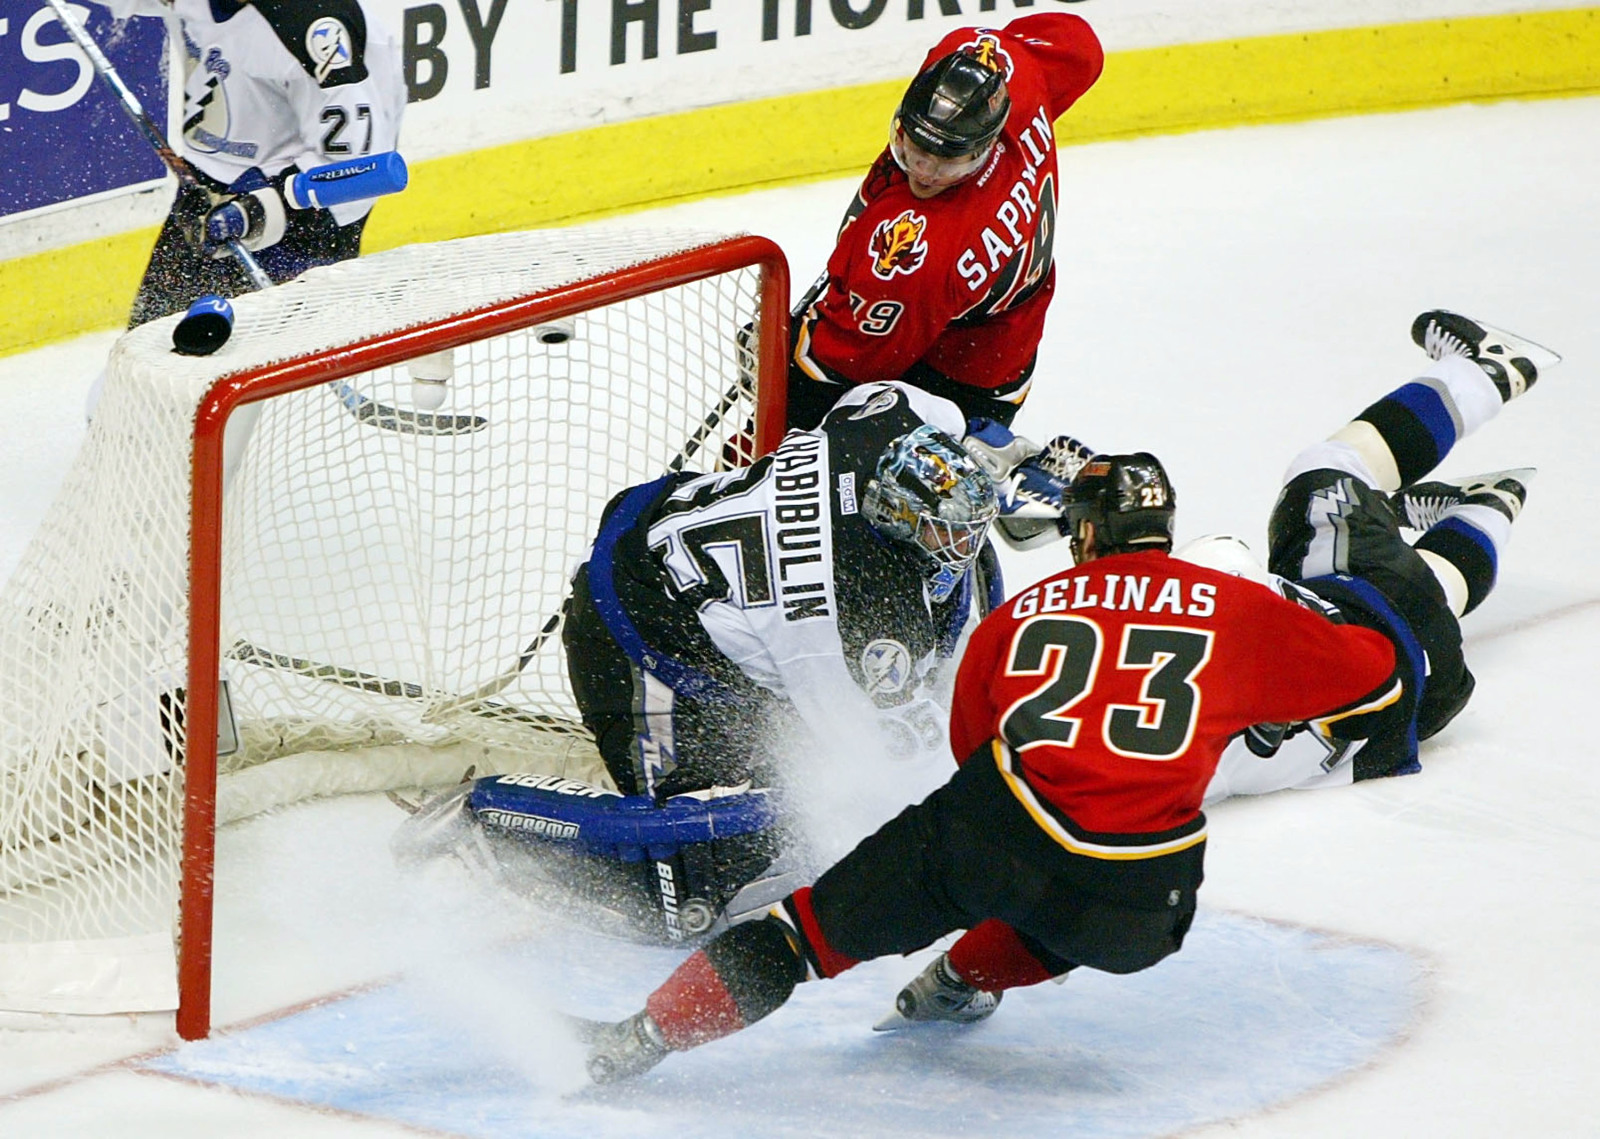 Calgary Flames 2004 cup run: Where are they now?